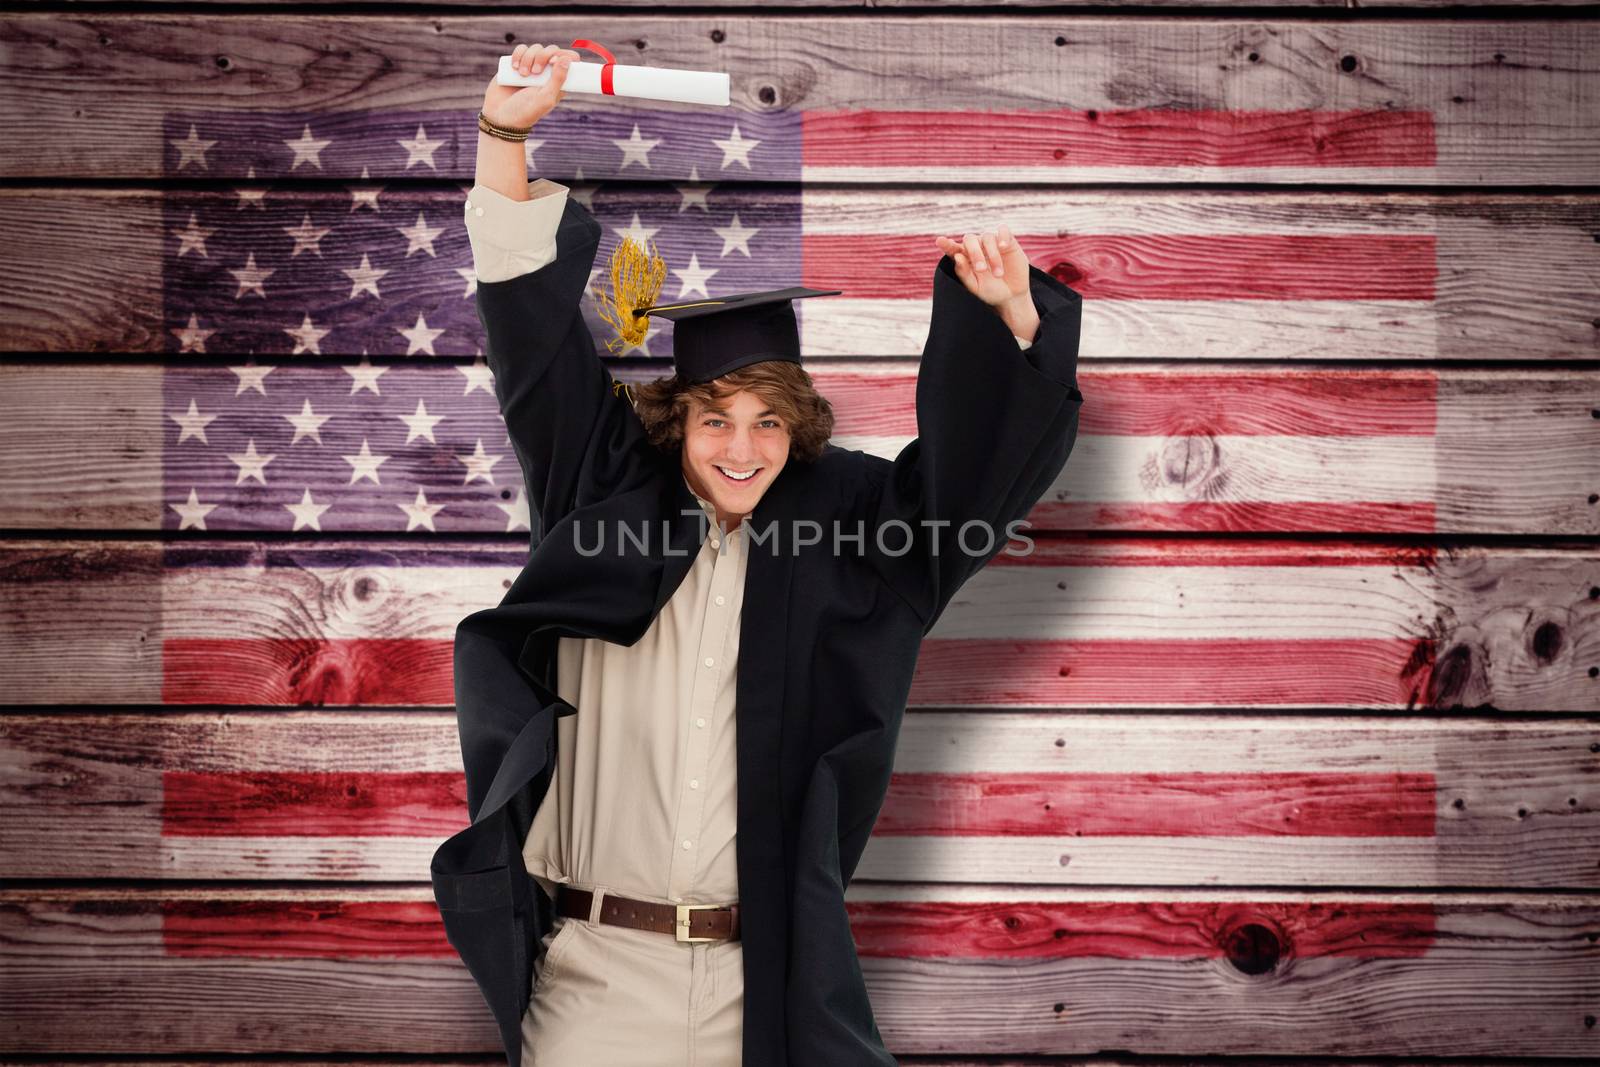 Male student in graduate robe jumping against composite image of usa national flag